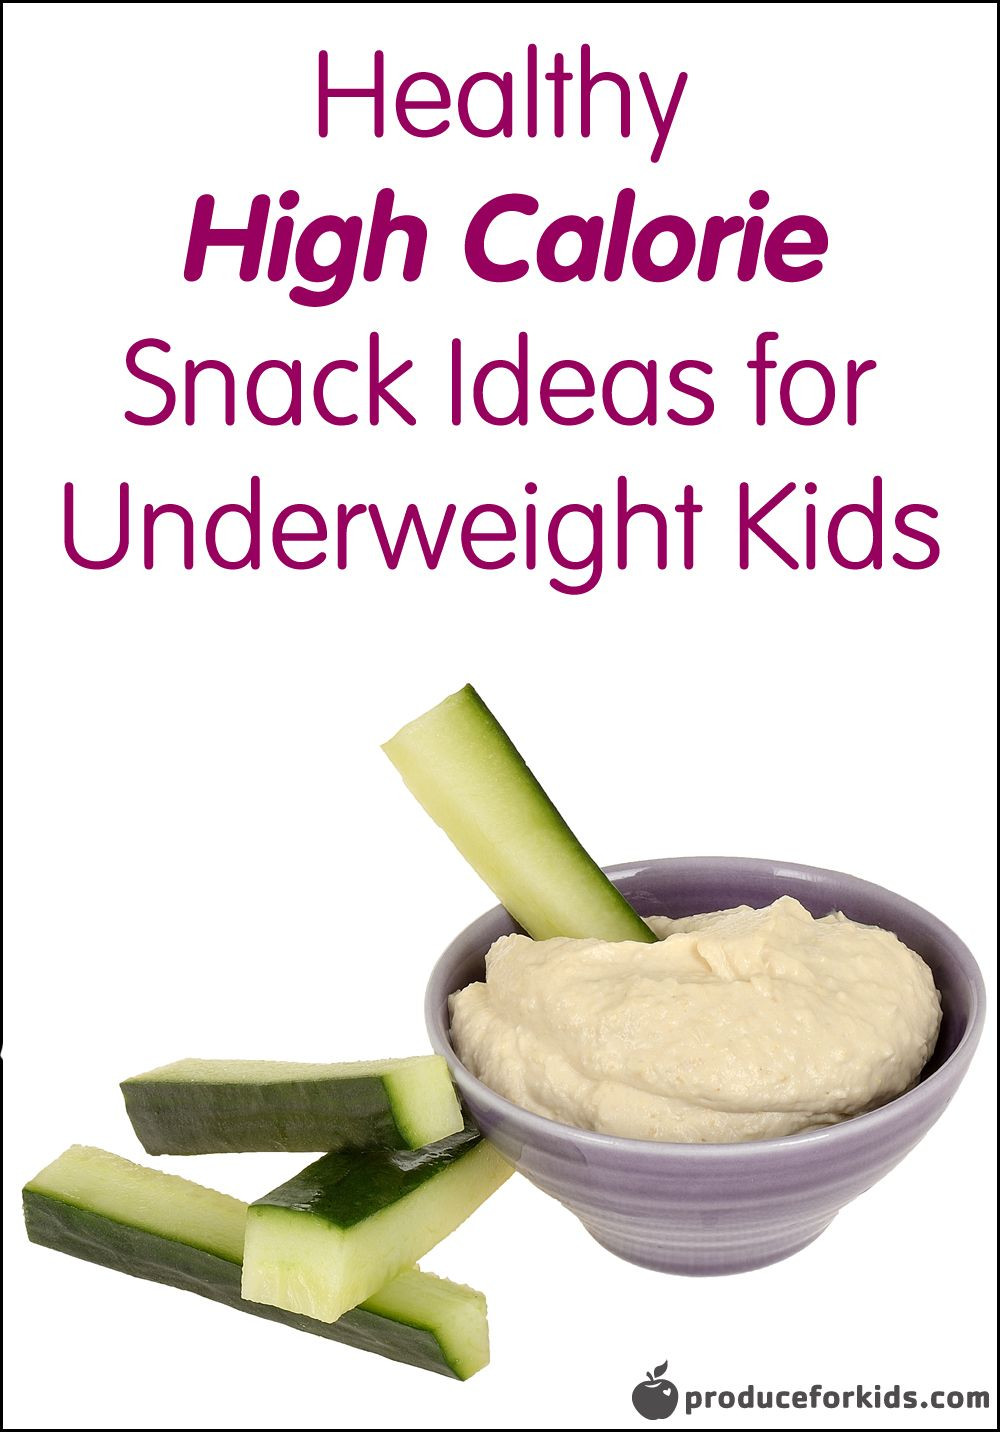 Healthy High Carb Snacks
 Healthy High Calorie Snack Ideas for Underweight Kids